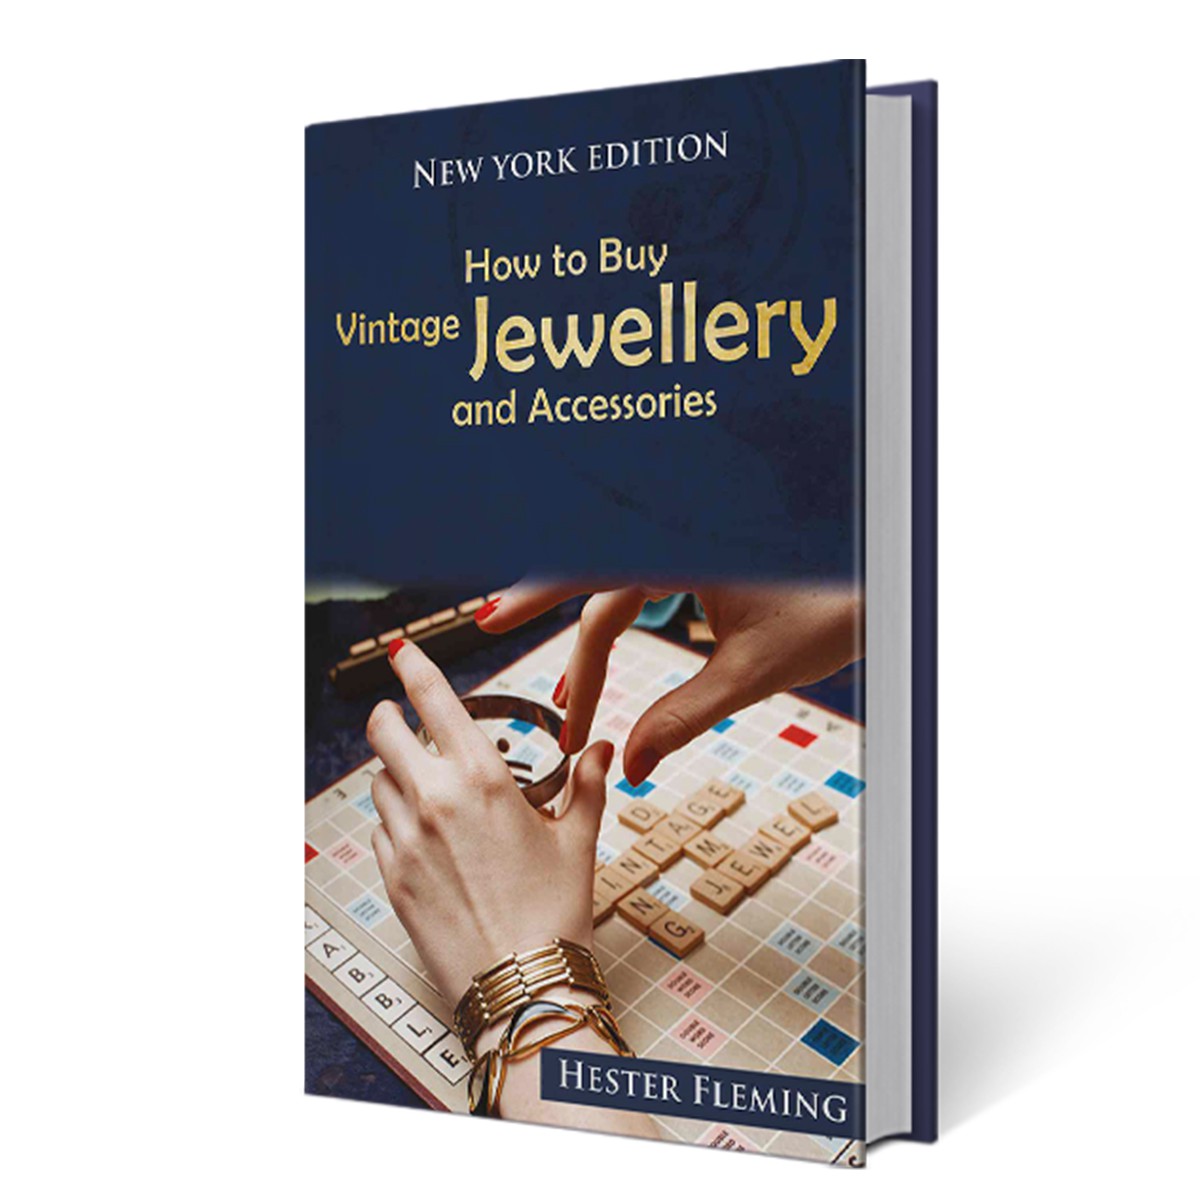 Win a Copy of How to Buy Vintage Jewellery and Accessories